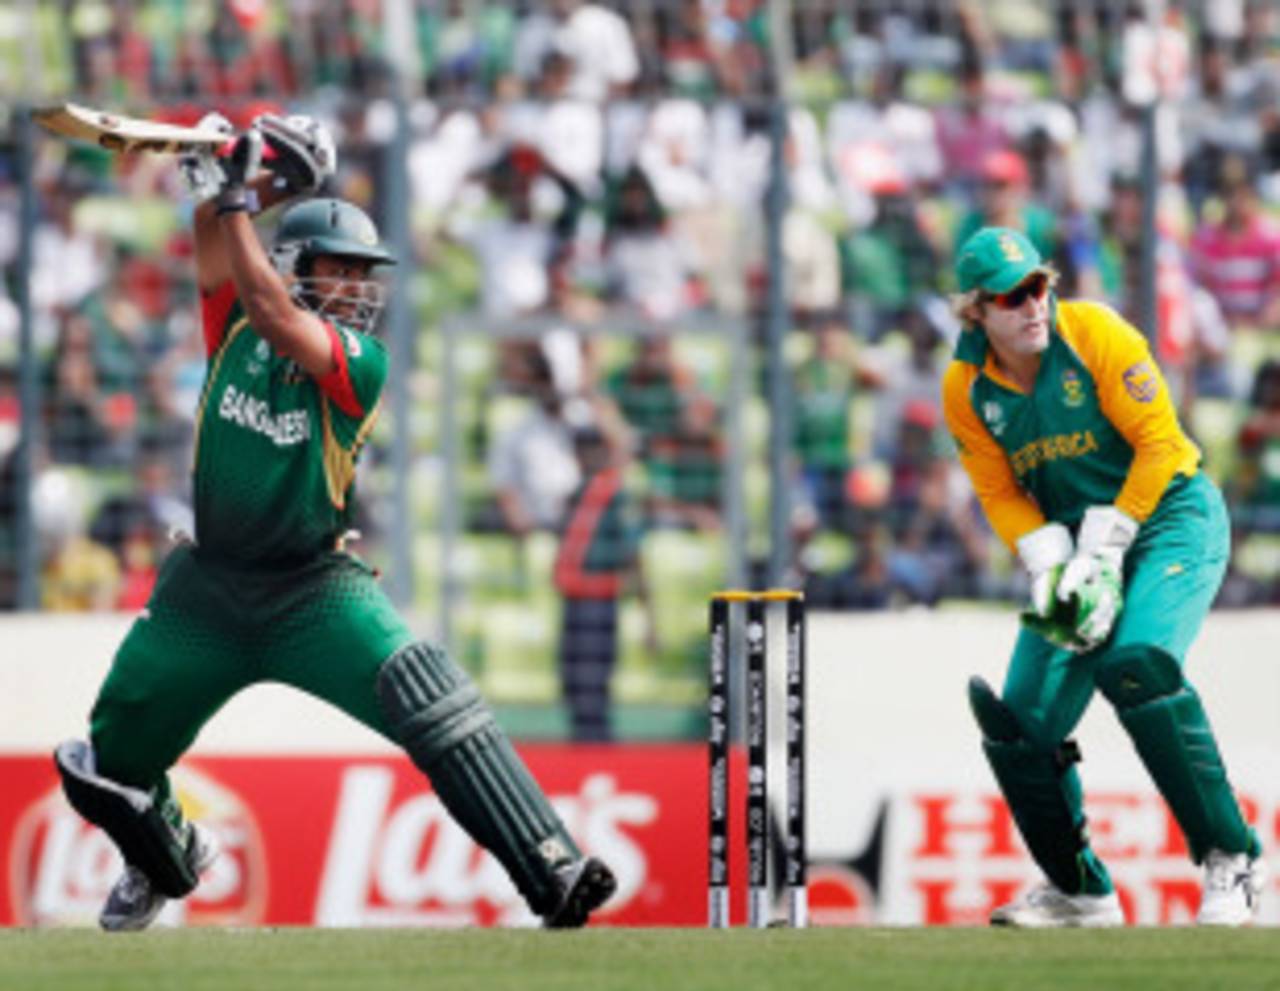 Tamim Iqbal is one of the world's most exciting batsmen&nbsp;&nbsp;&bull;&nbsp;&nbsp;Getty Images